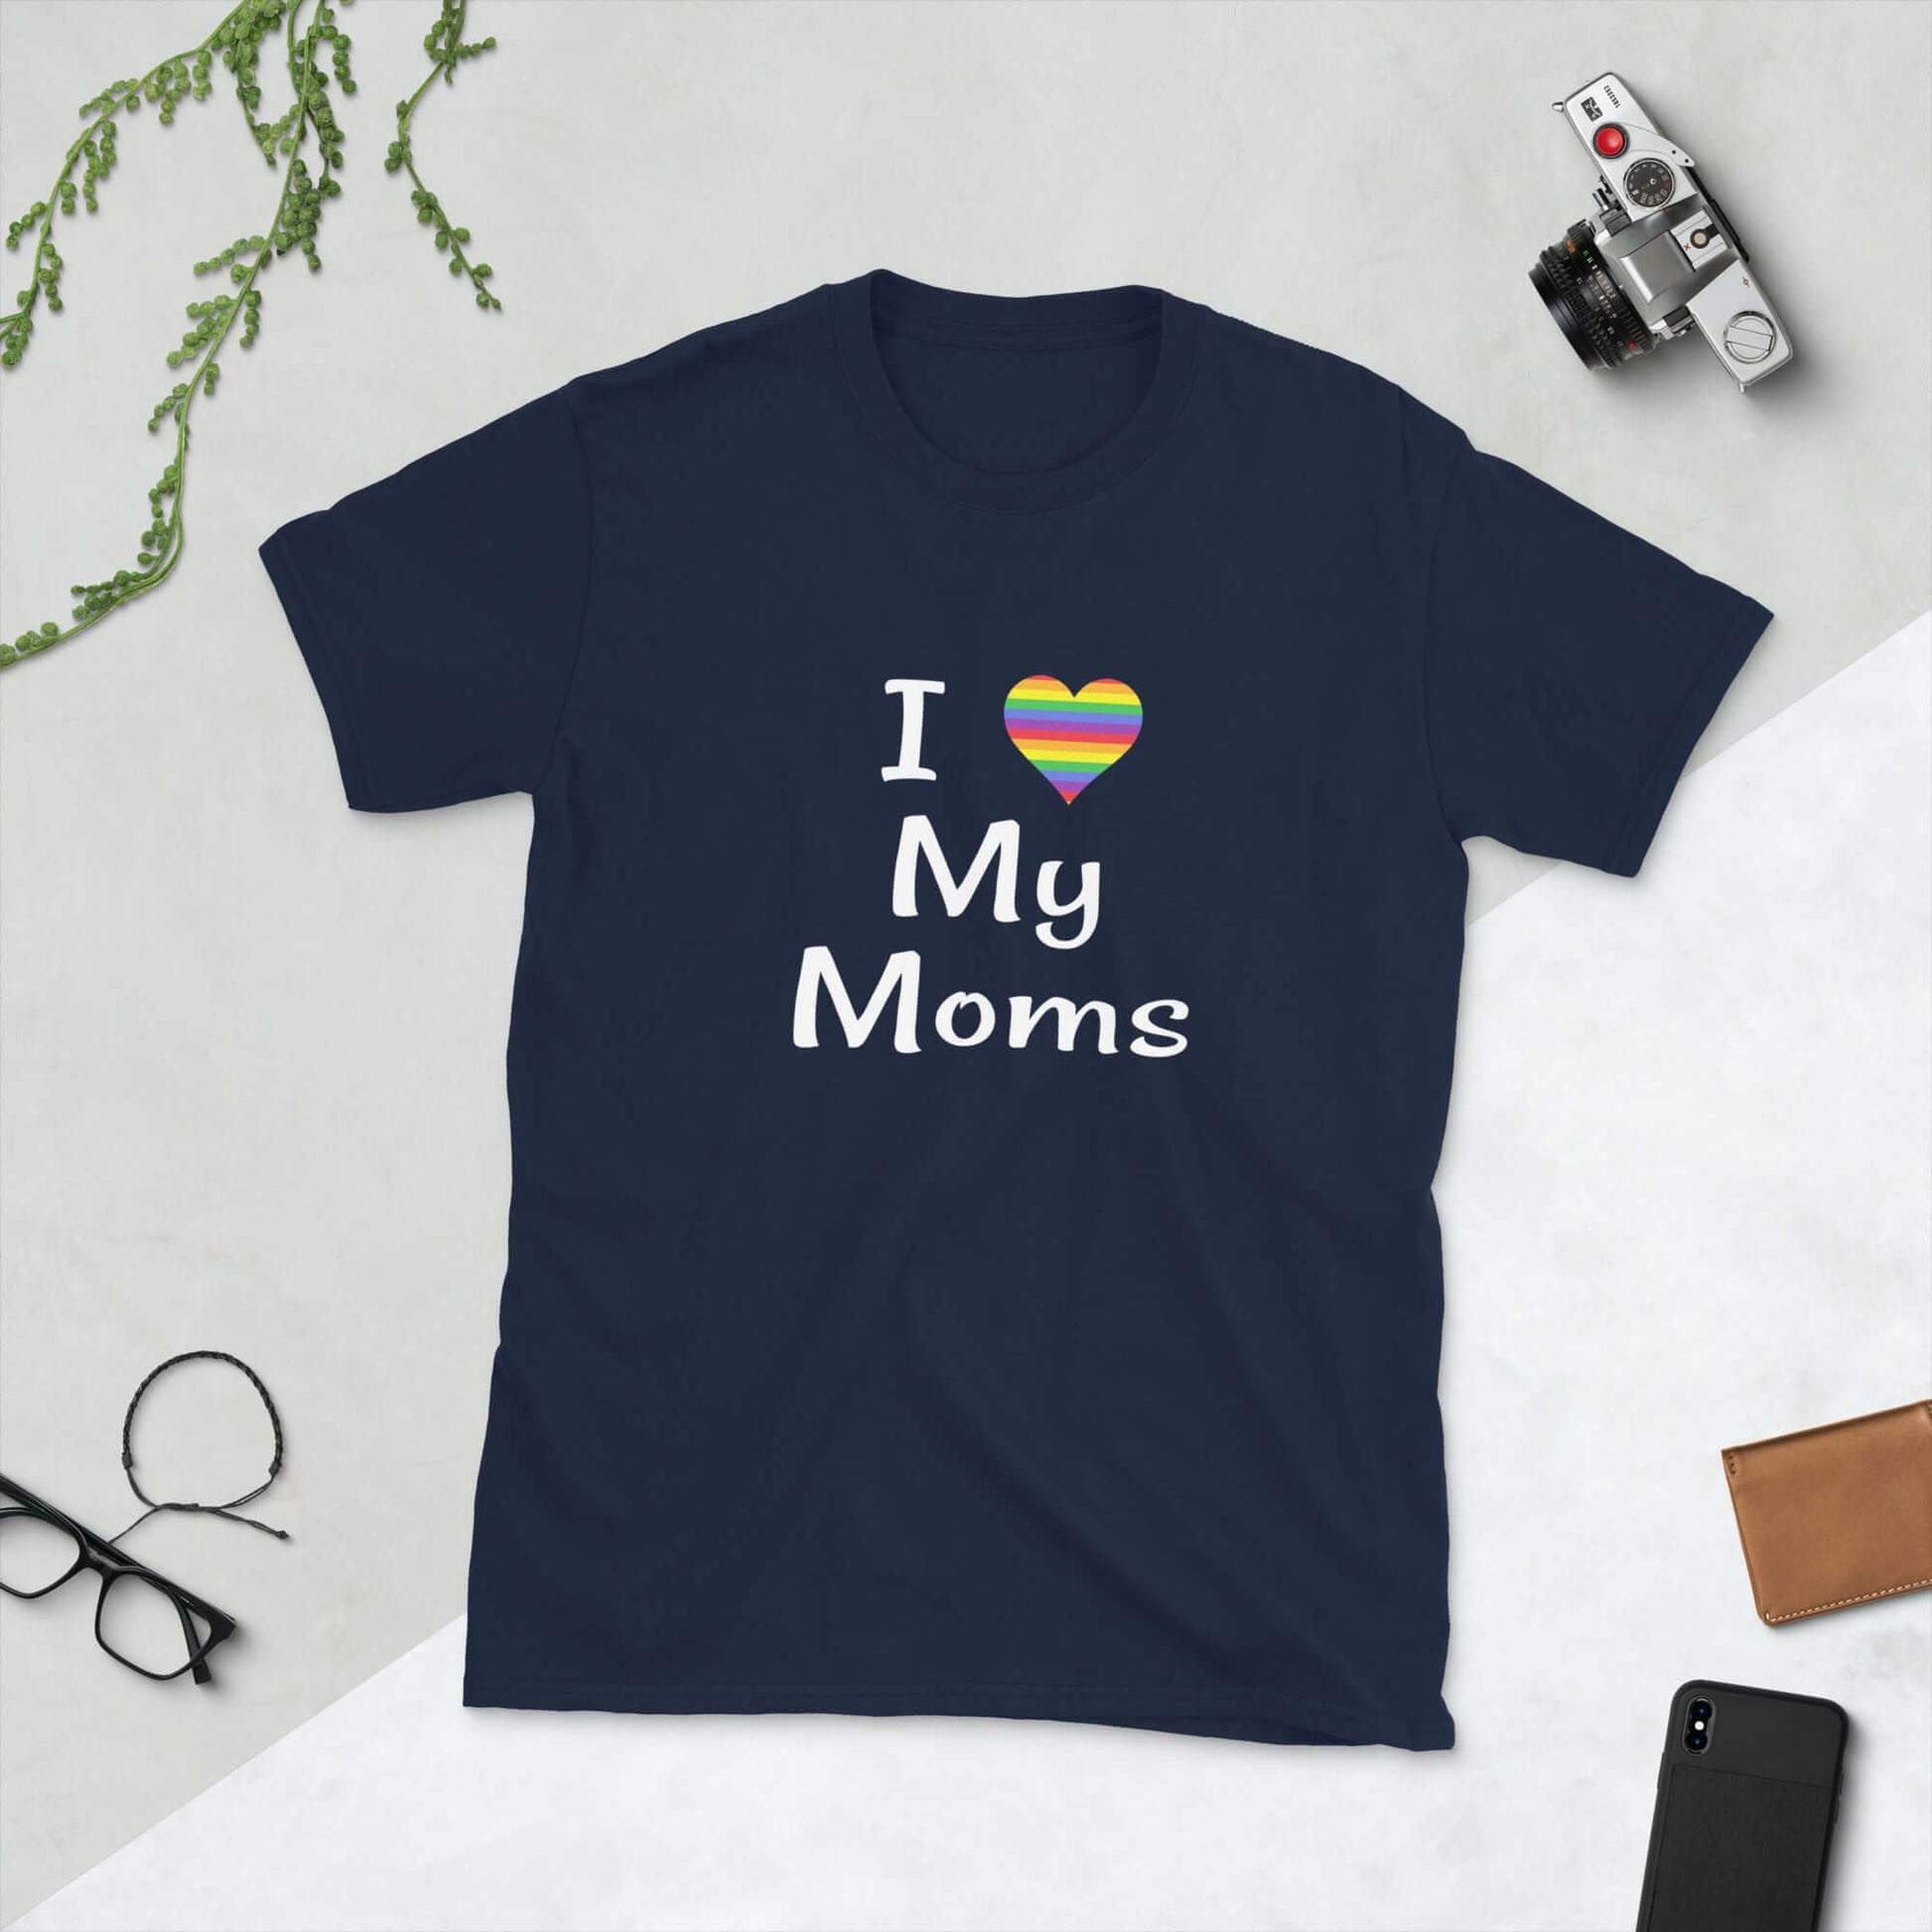 Navy blue t-shirt with I heart my moms printed on the front. The heart is rainbow colors.